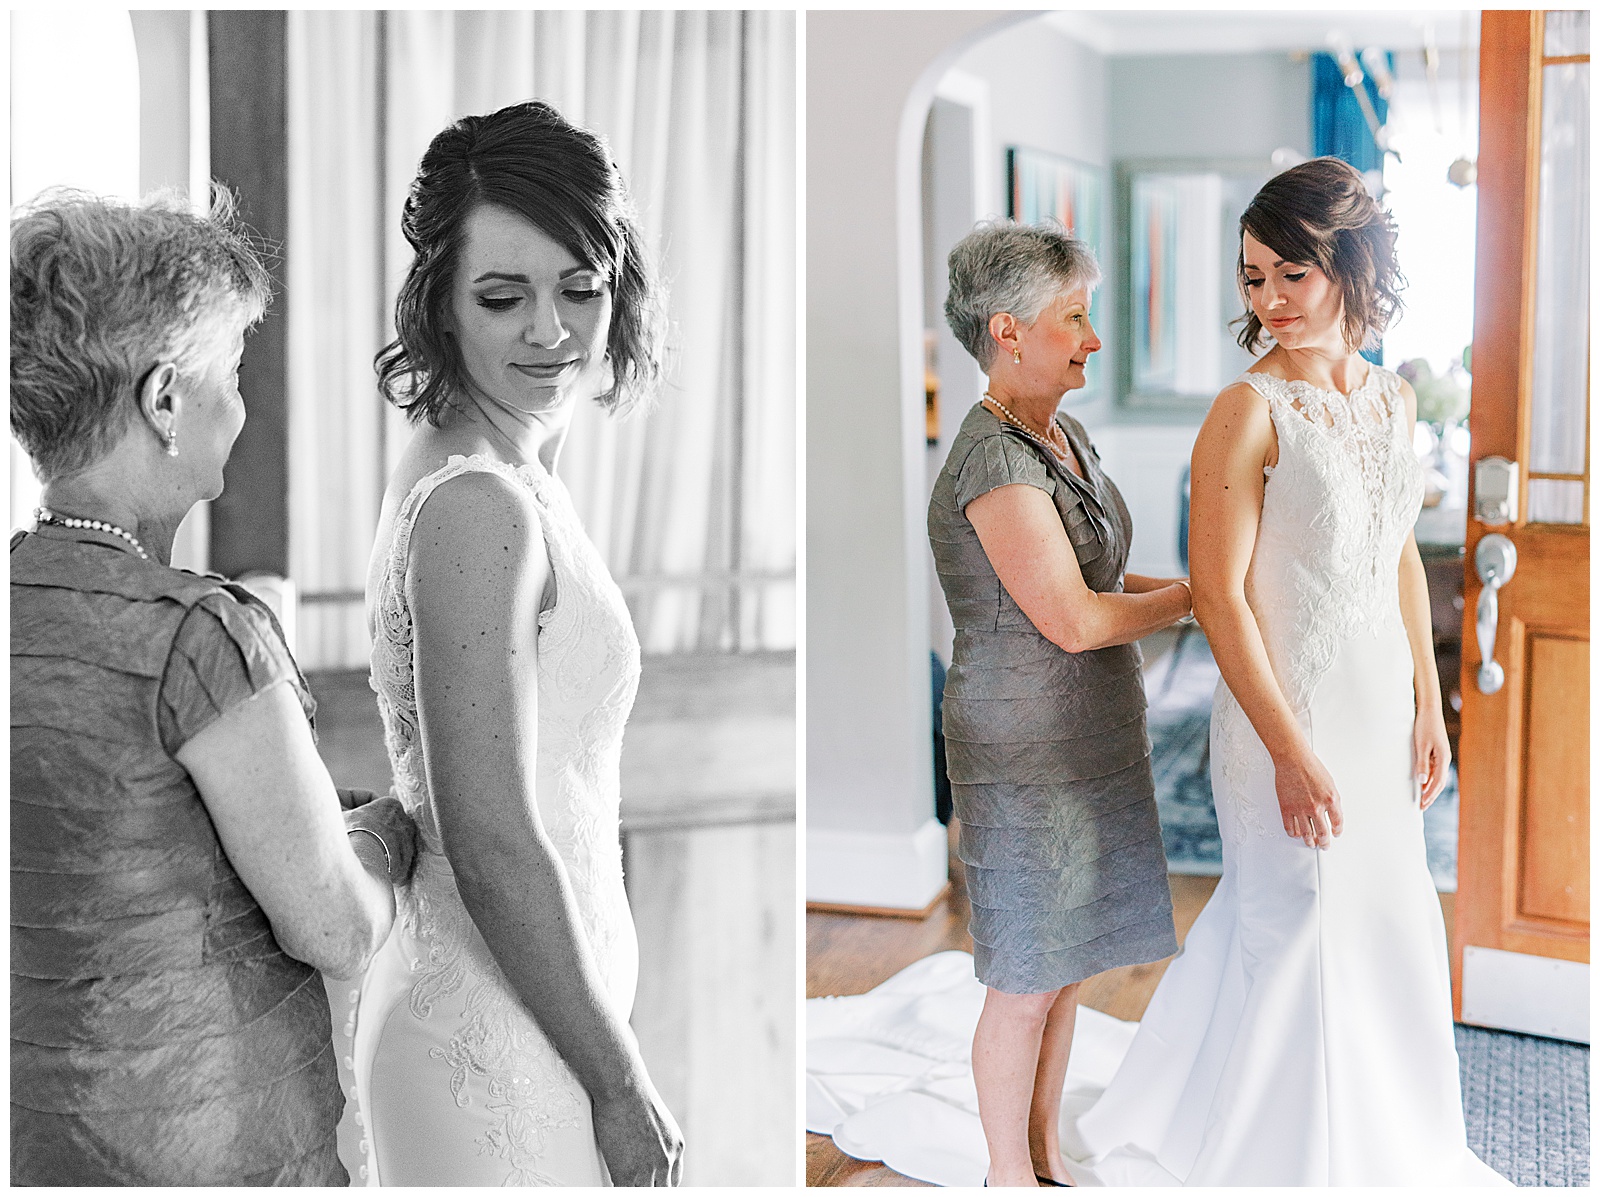 bride getting ready in lace wedding dress - short brown hair